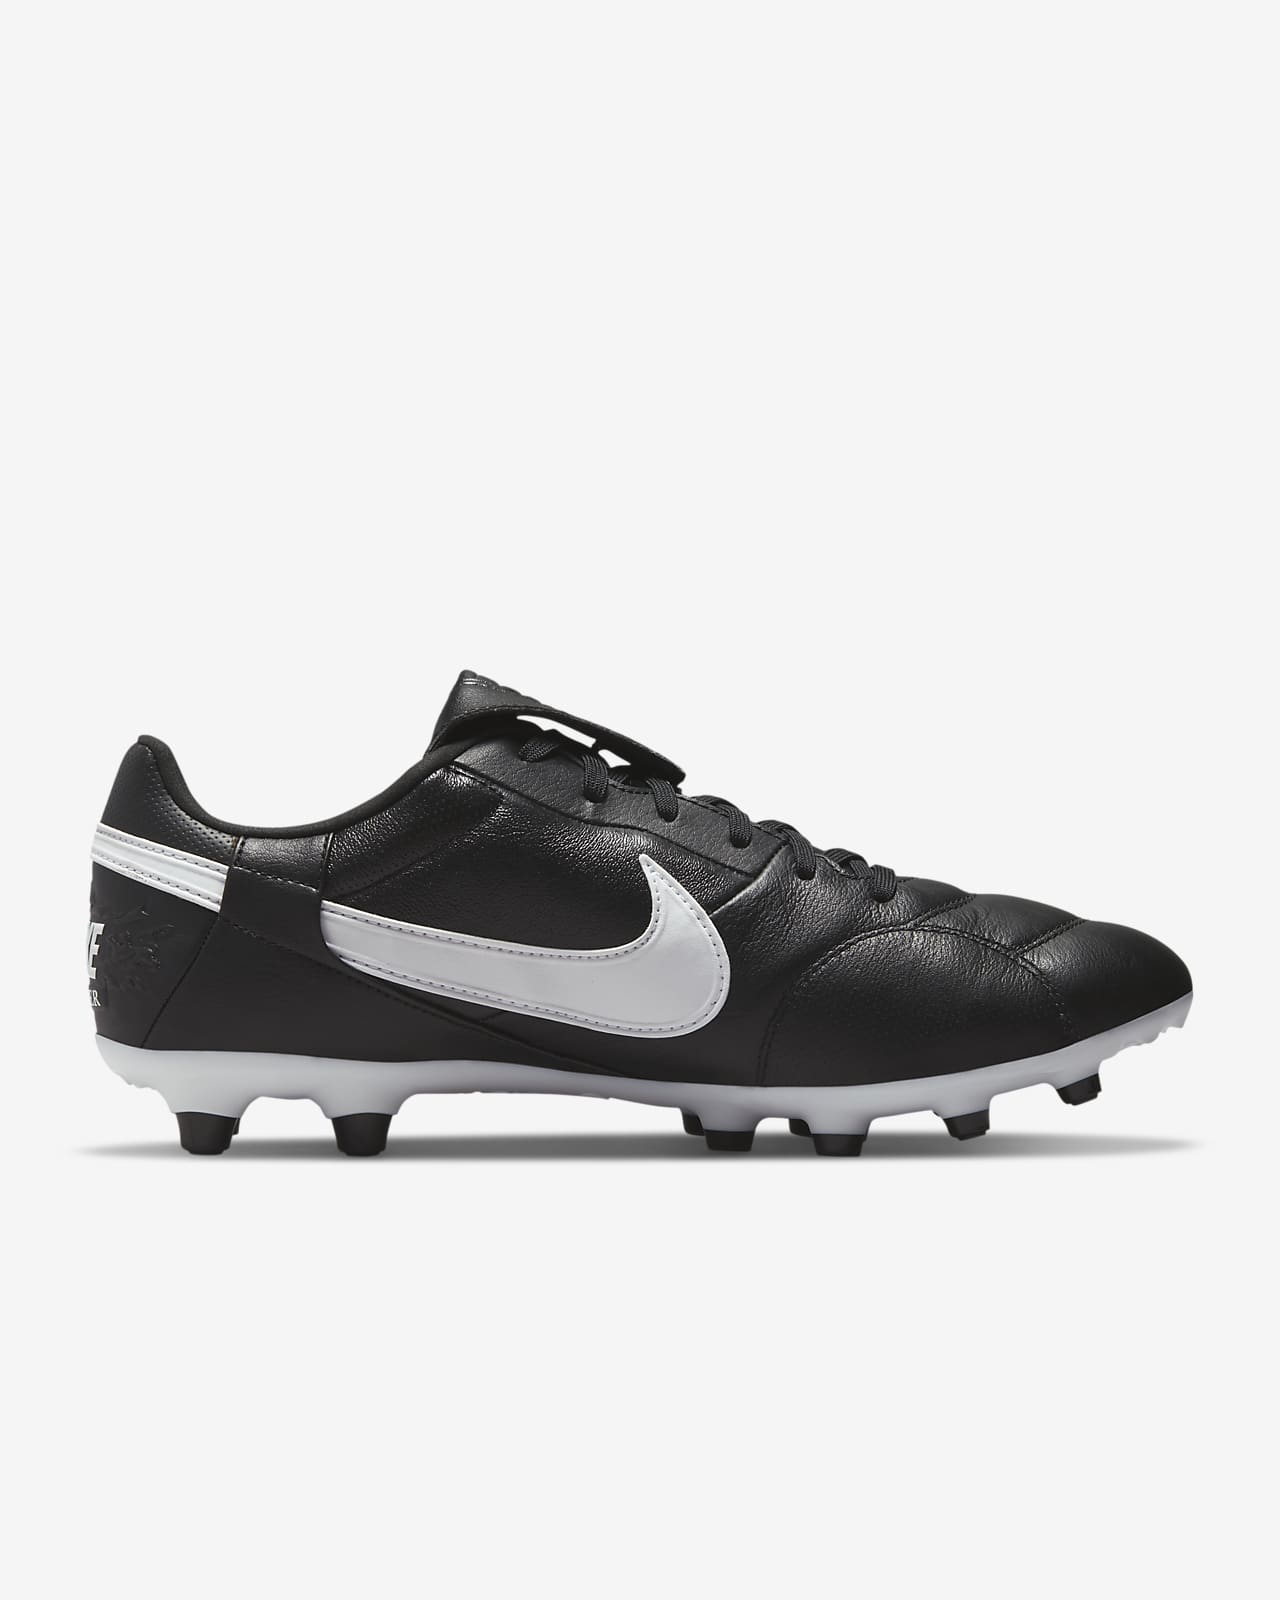 FG Firm-Ground Football Boots. Nike 